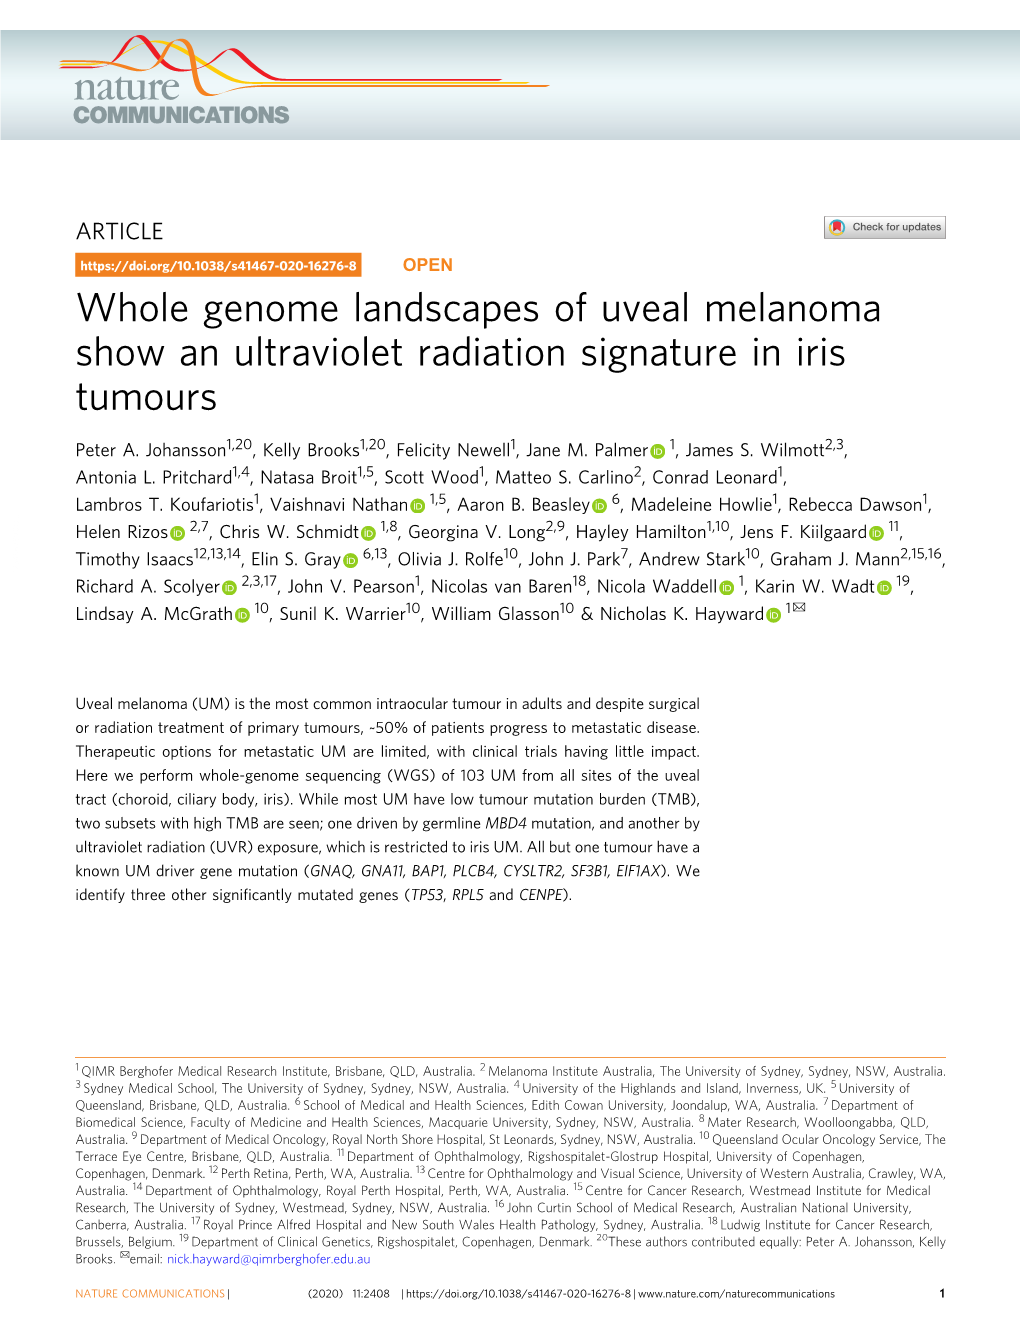 Whole Genome Landscapes of Uveal Melanoma Show an Ultraviolet Radiation Signature in Iris Tumours